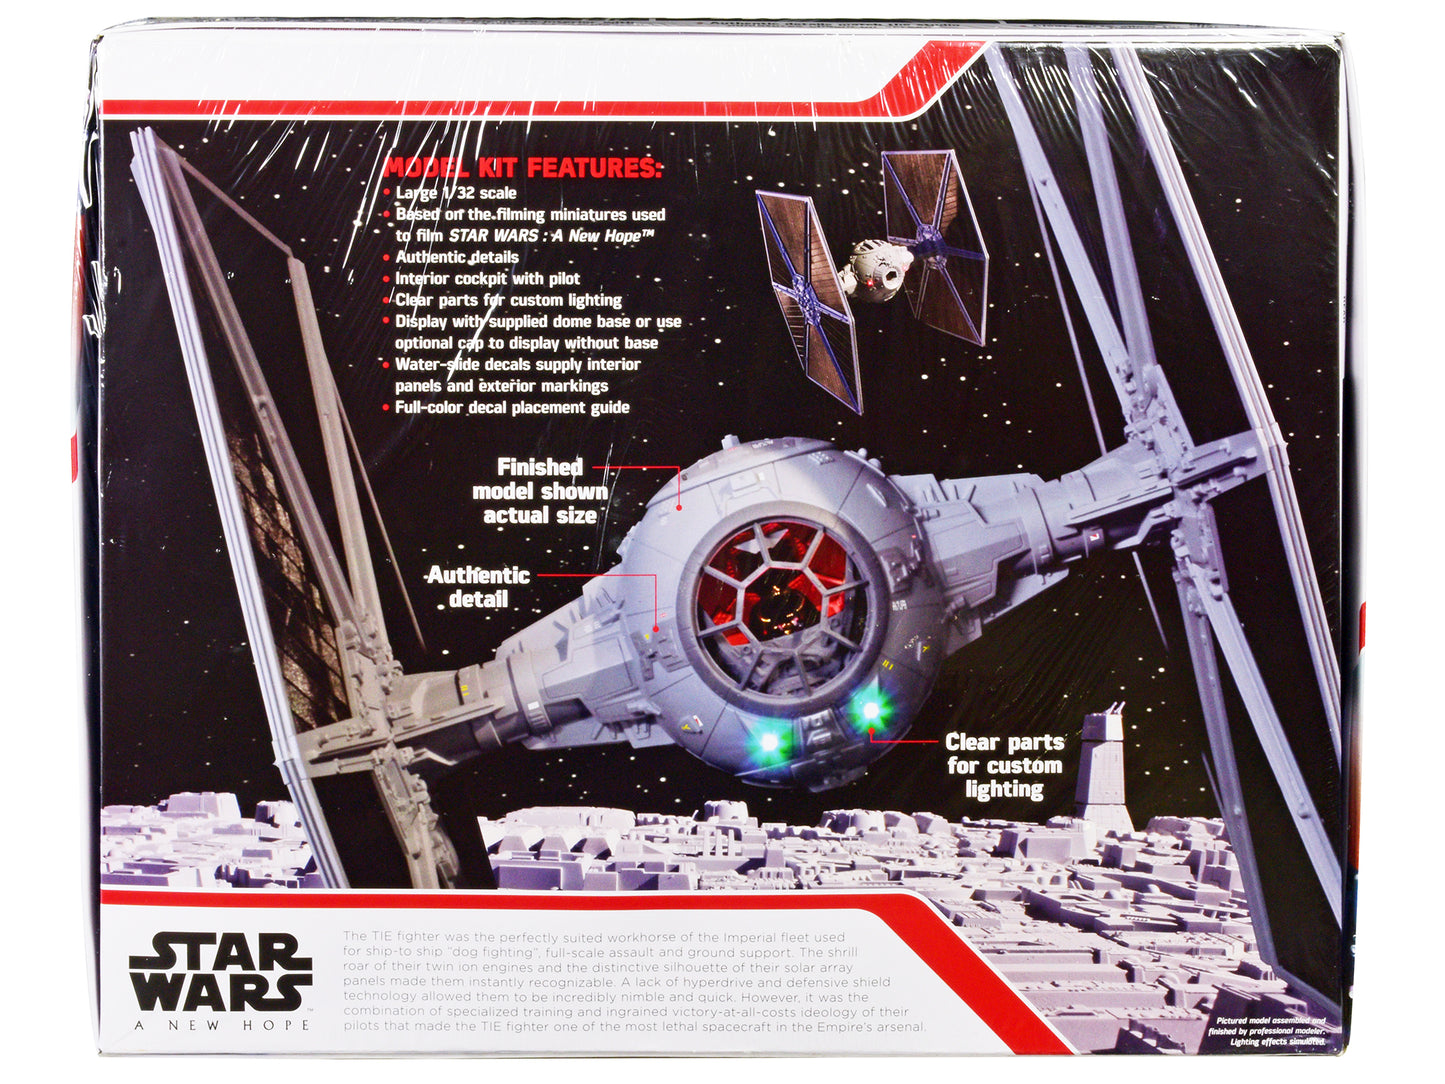 skill model kit tie fighter star wars episode iv ??? new hope movie 1/32 scale